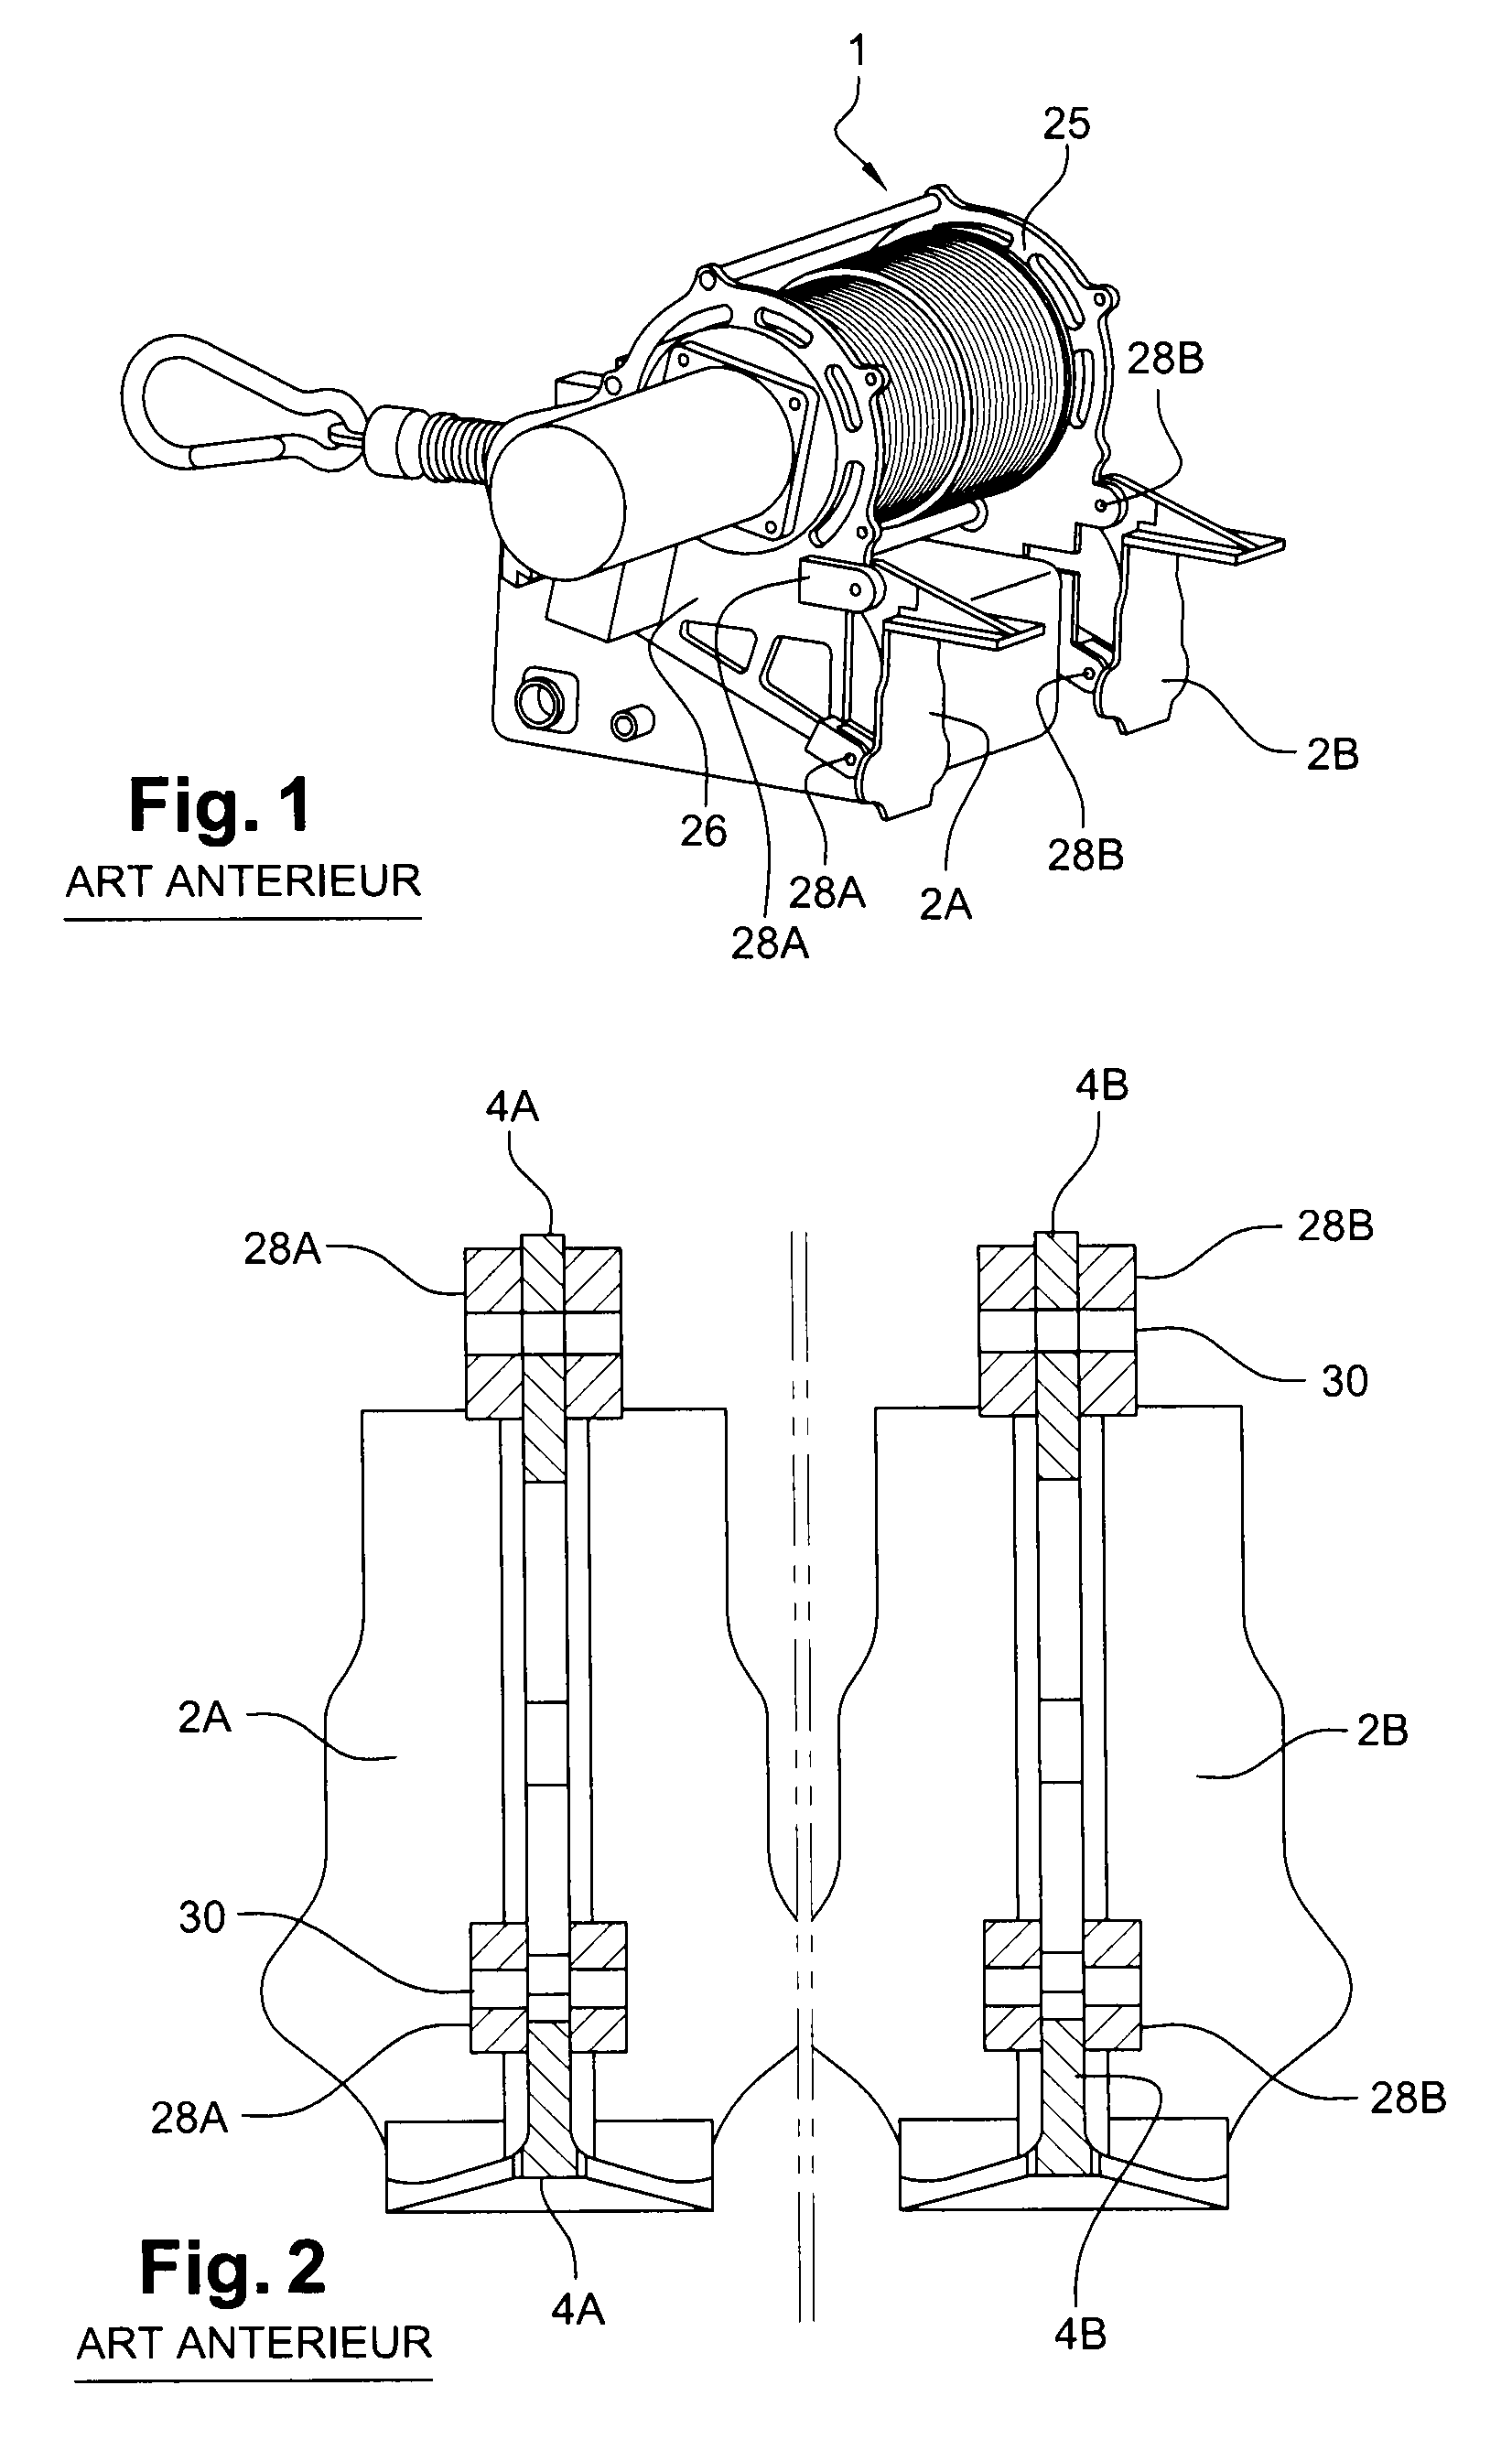 Attachment interface device for attaching mobile equipment to an aircraft structure